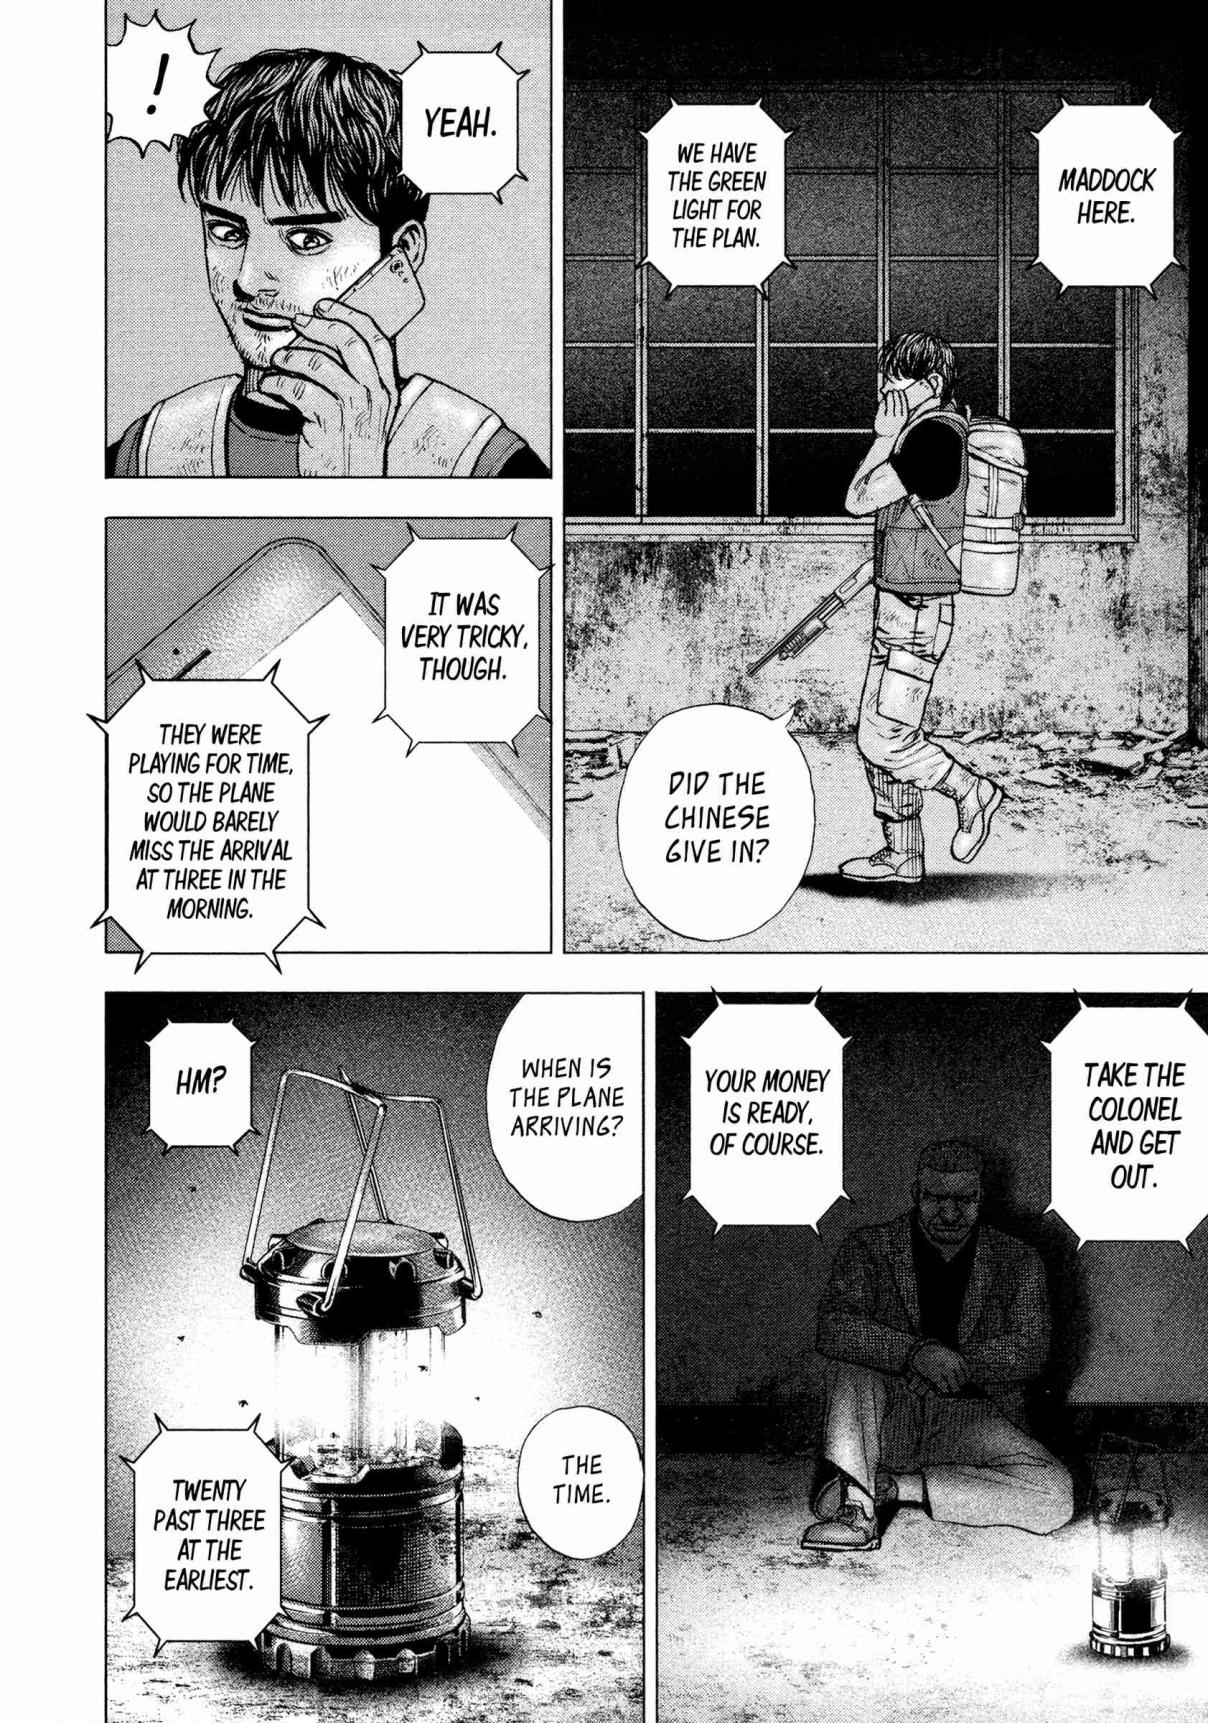 ZIG Vol. 1 Ch. 6 What Ought to be Protected